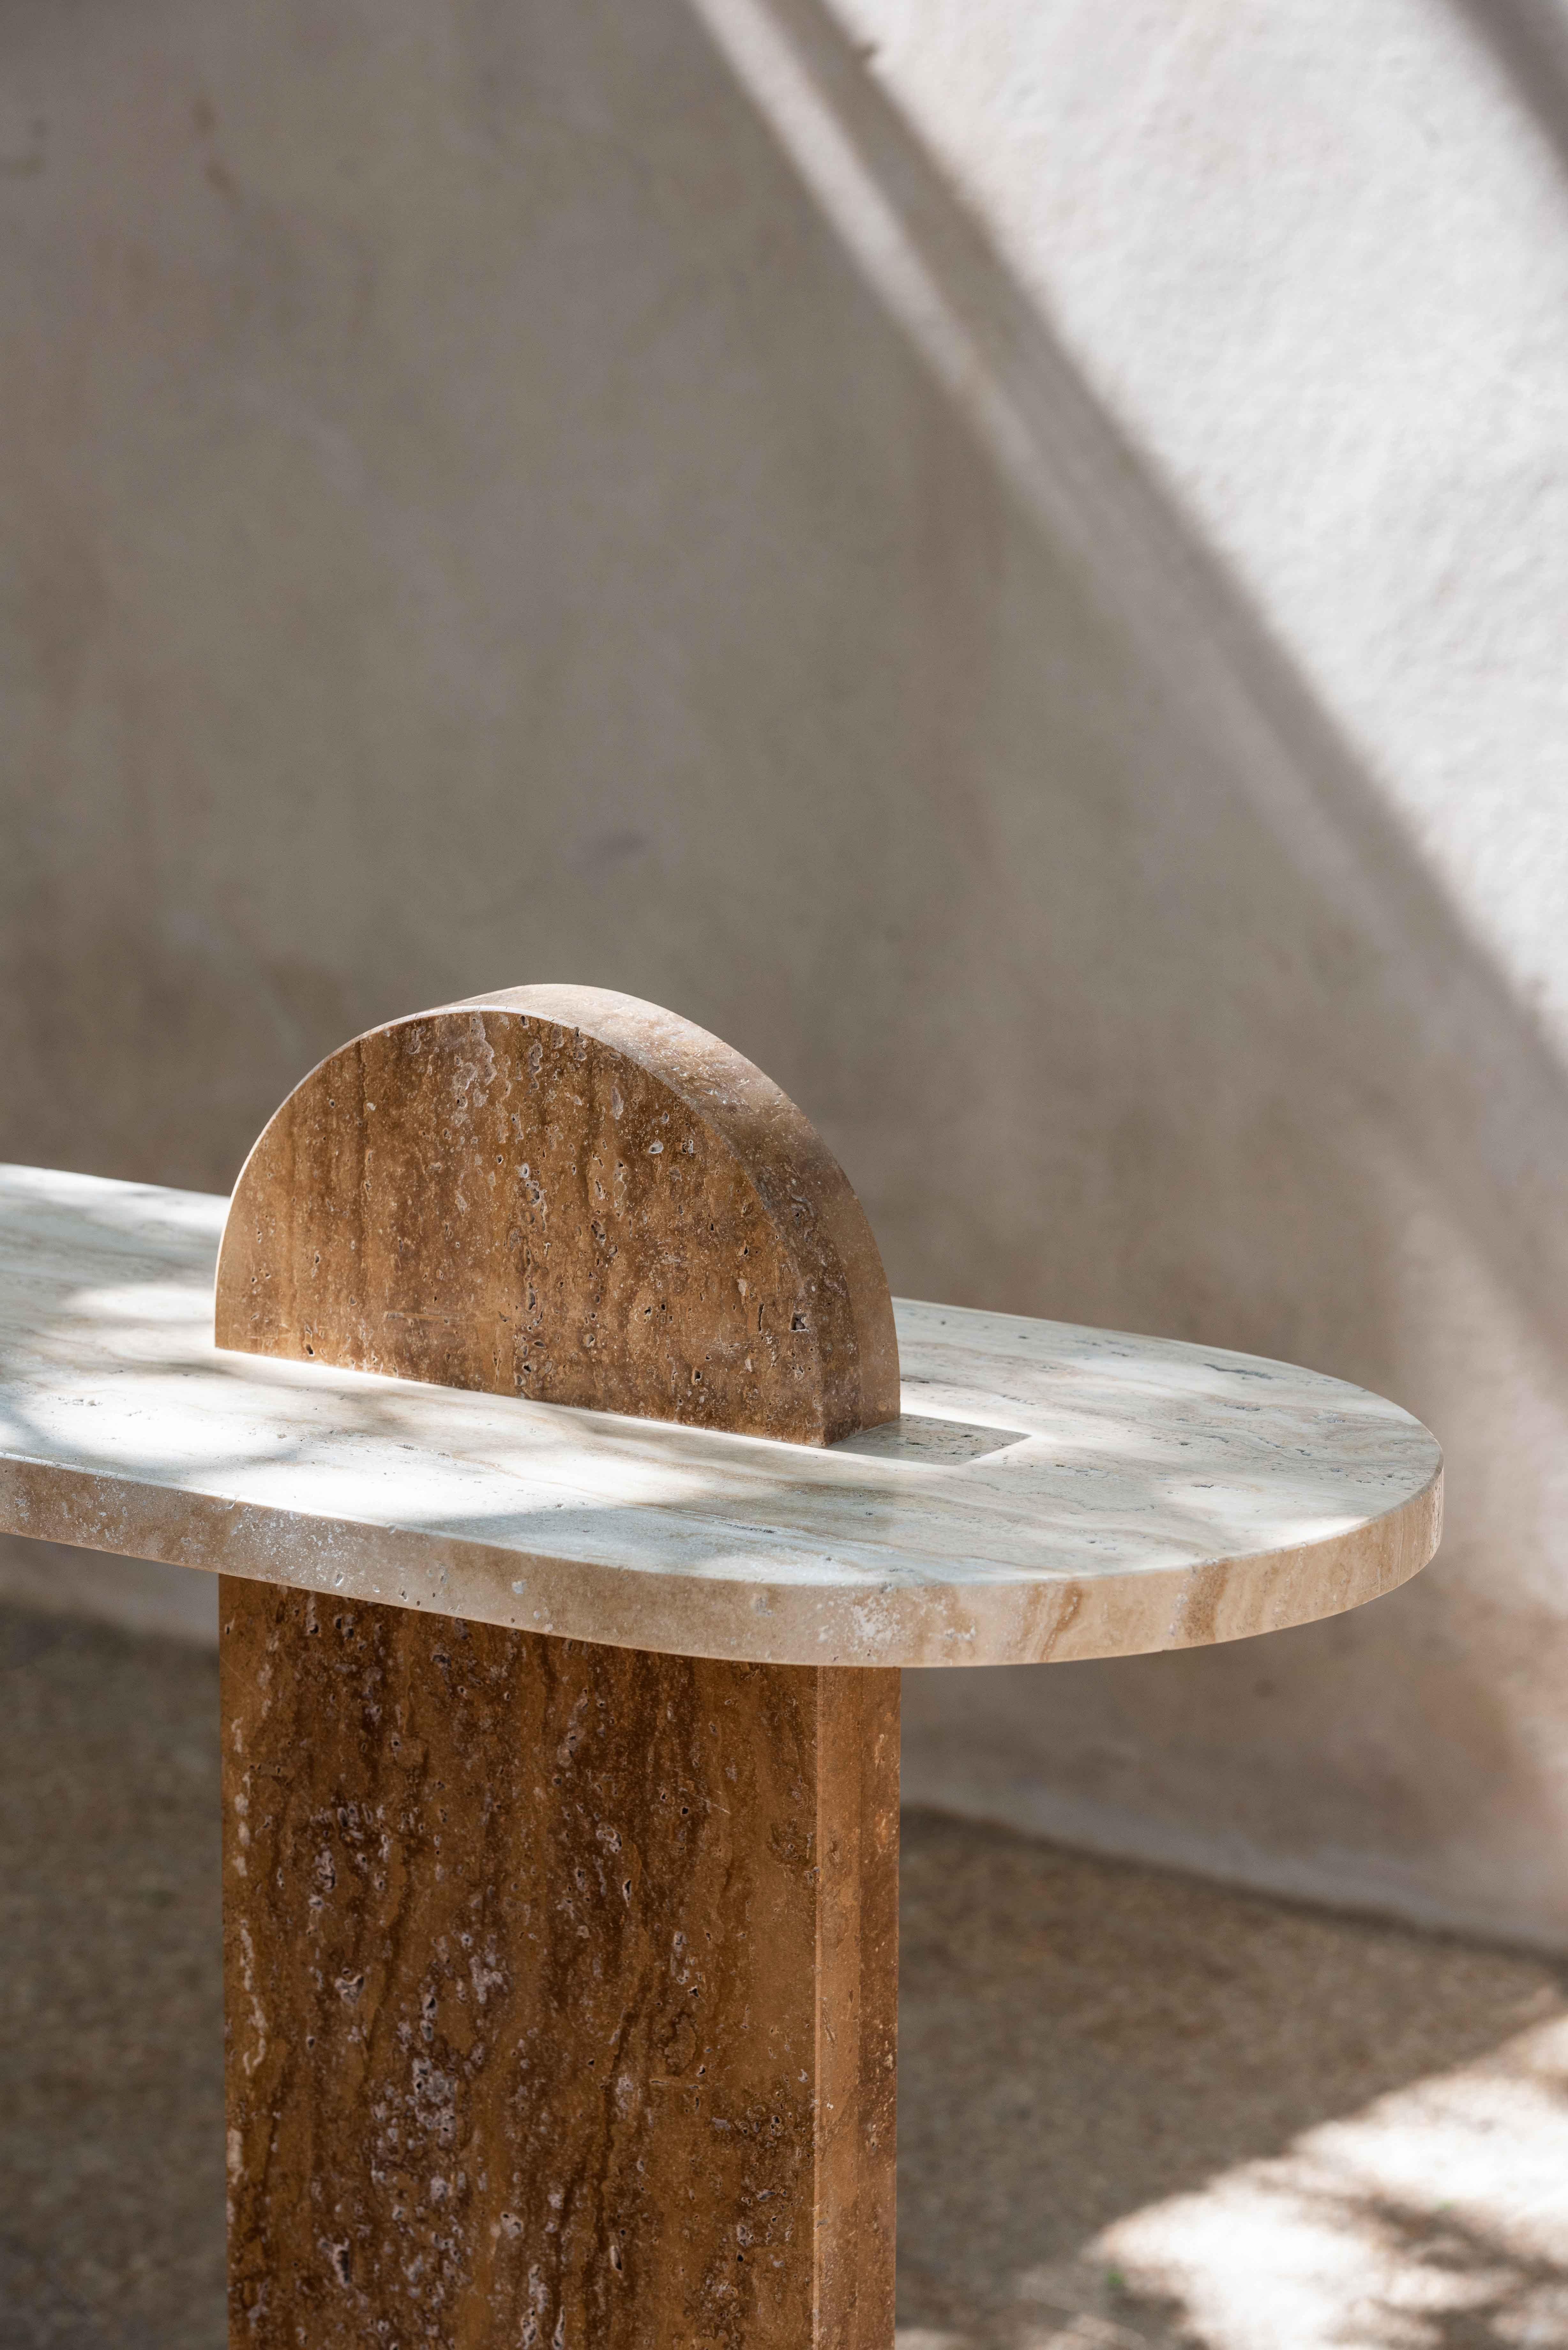 Gol. 002 marble console table by Chapter Studio
Dimensions: H 86 x W 40 x D 160
Material: marble (beige travertine, dark emperador)

Effortless composition and eccentric design bring forth the Golestan Series. Evoking rich emotions of heritage